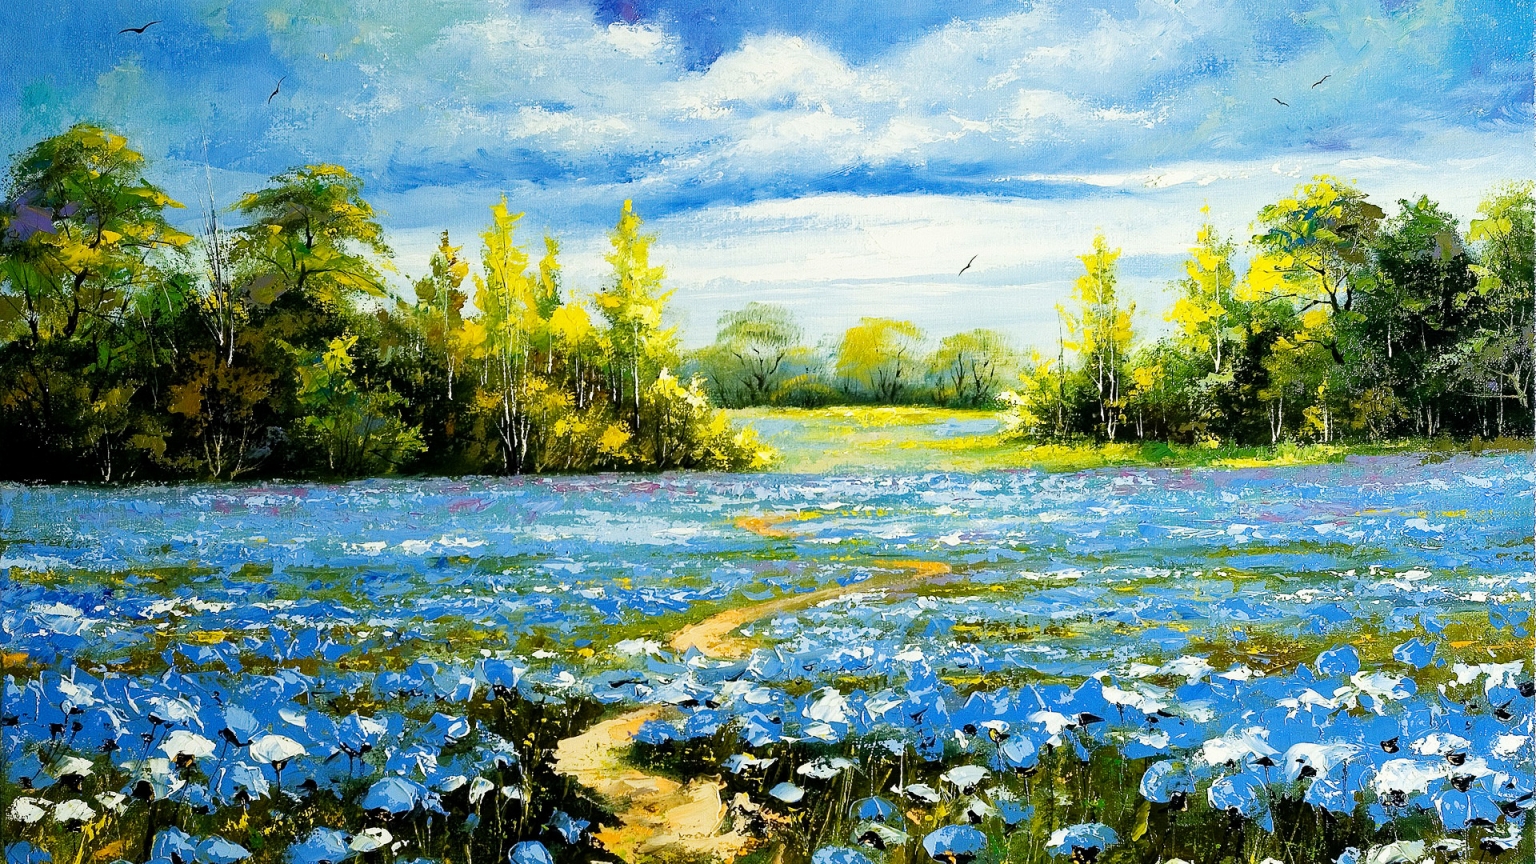 Landscape Oil Painting for 1536 x 864 HDTV resolution